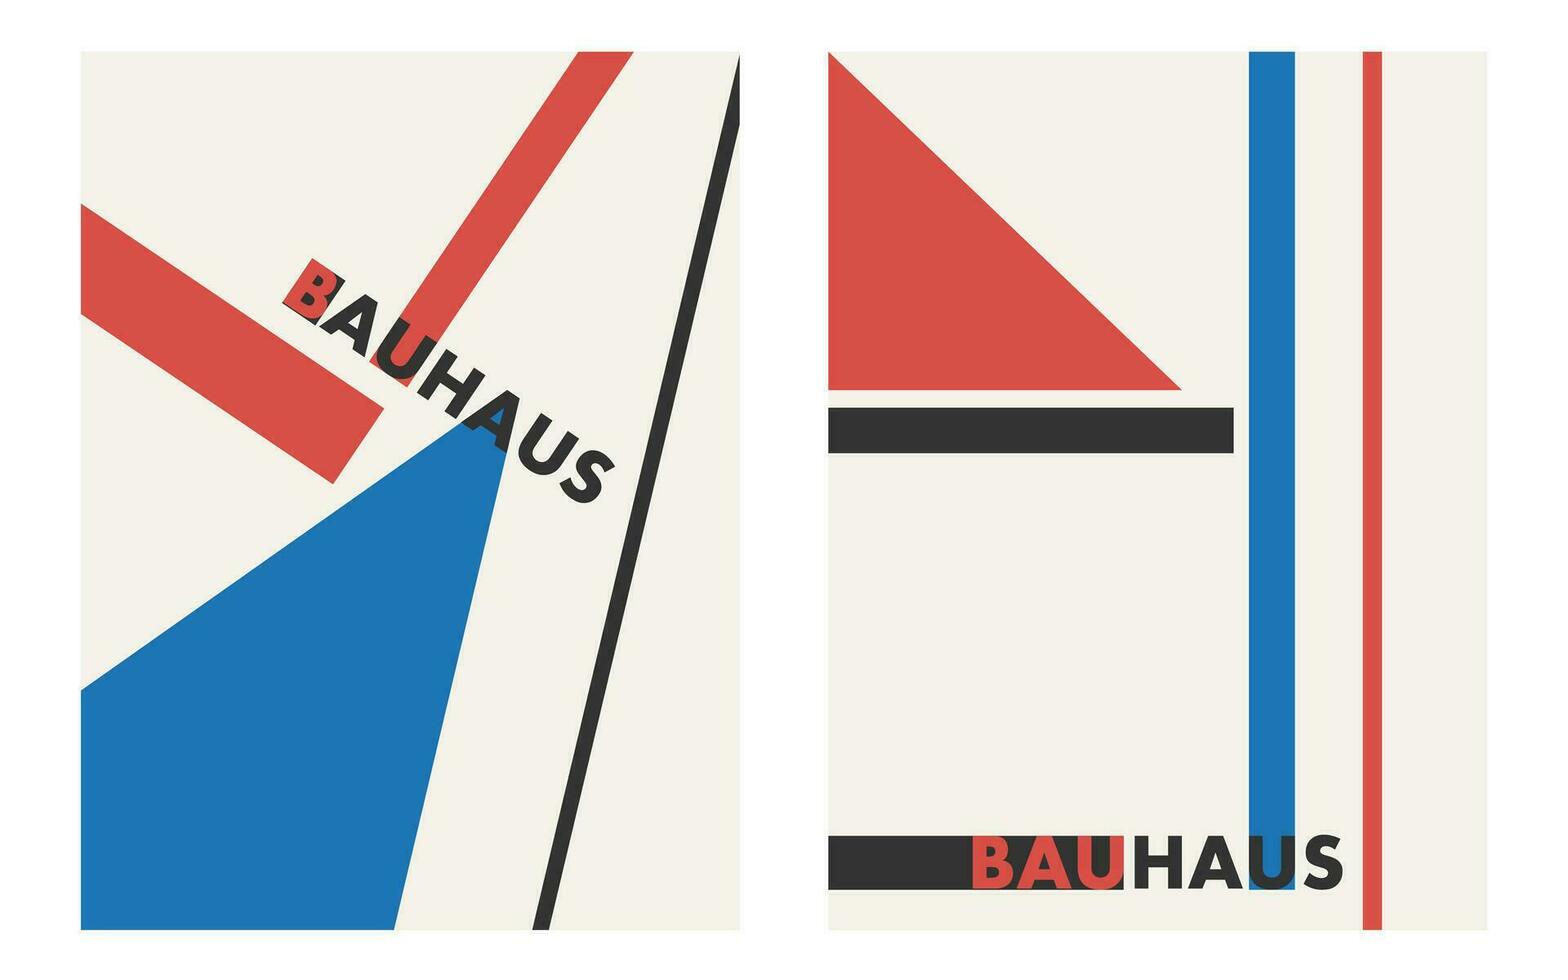 Brutalist design elements. Posters with geometric shapes. Trendy 90s style. Bauhaus design style. vector